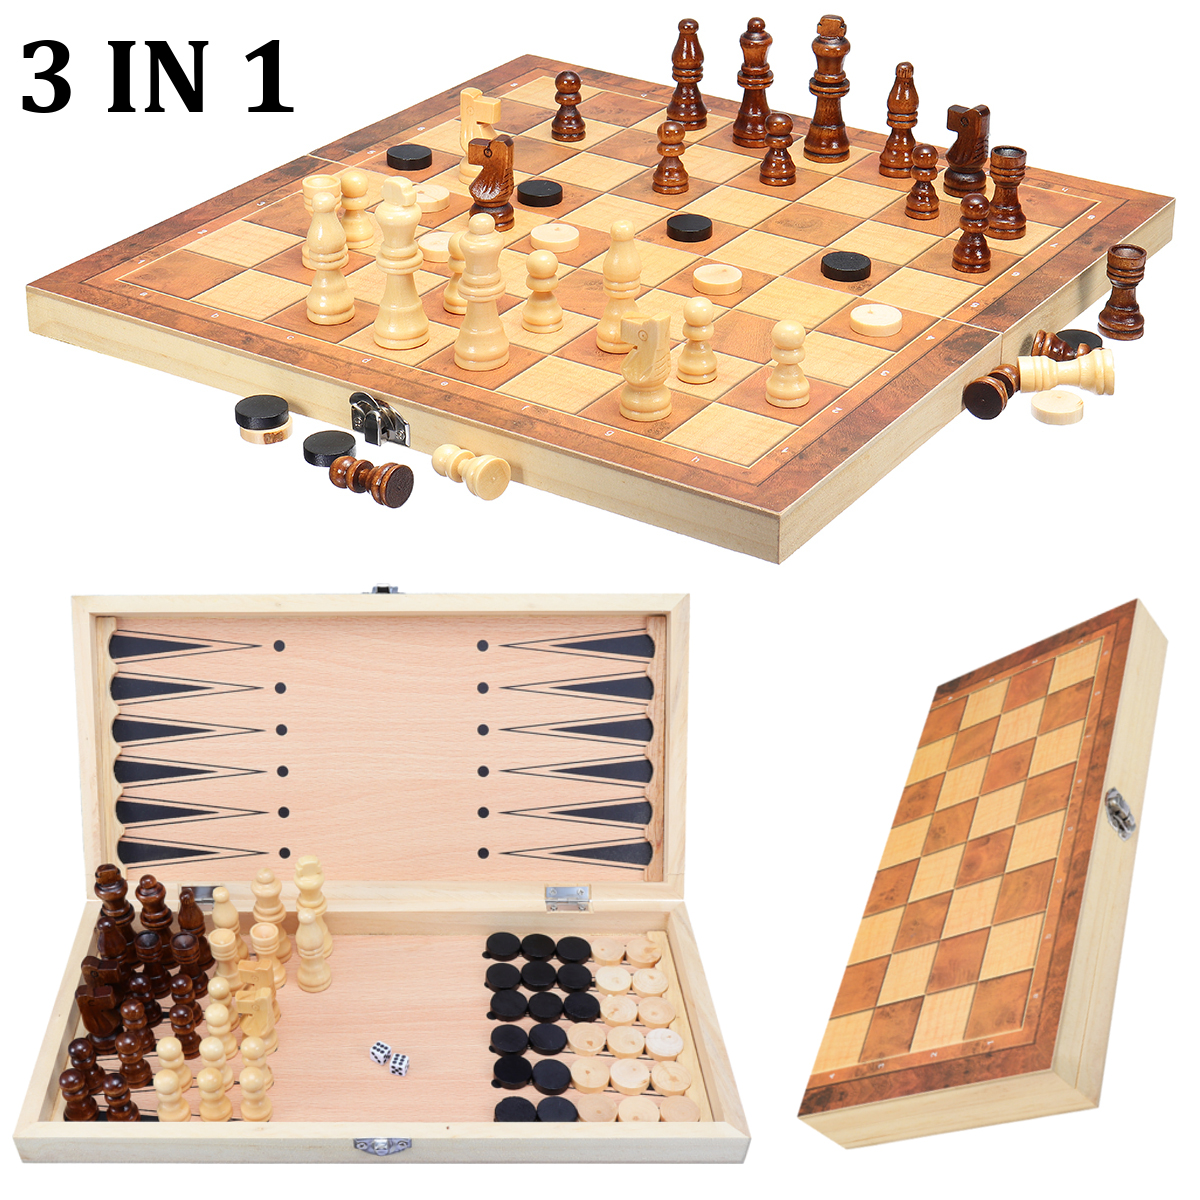 3 In 1 Adult Kids Toy Learning Backgammon Gift Chess Board Set Wooden Foldable 